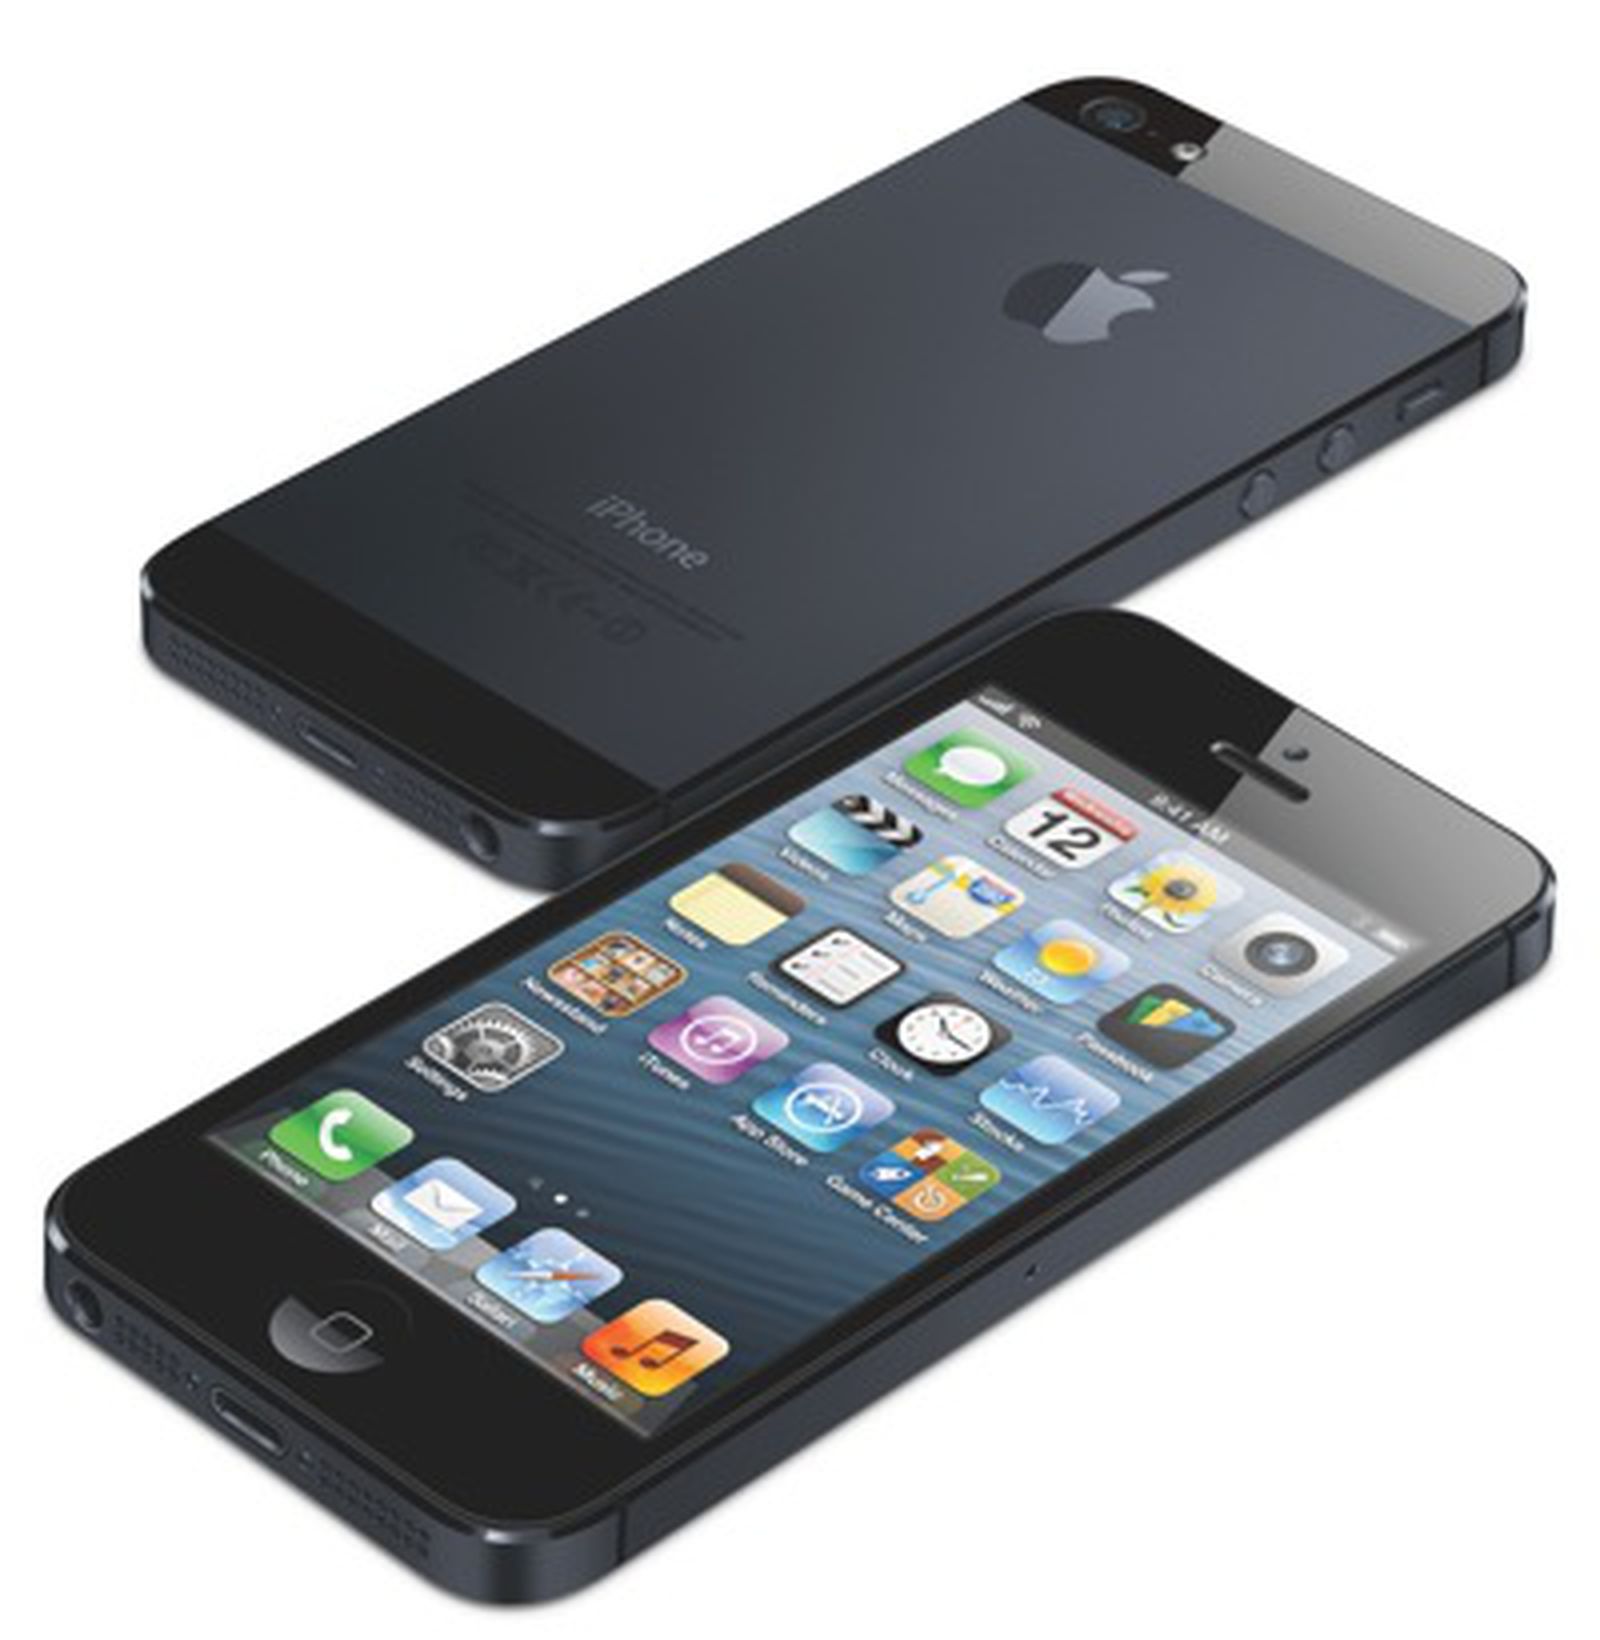 Vriend steen Th Apple Officially Obsoletes iPhone 5, Ending Repair Support - MacRumors